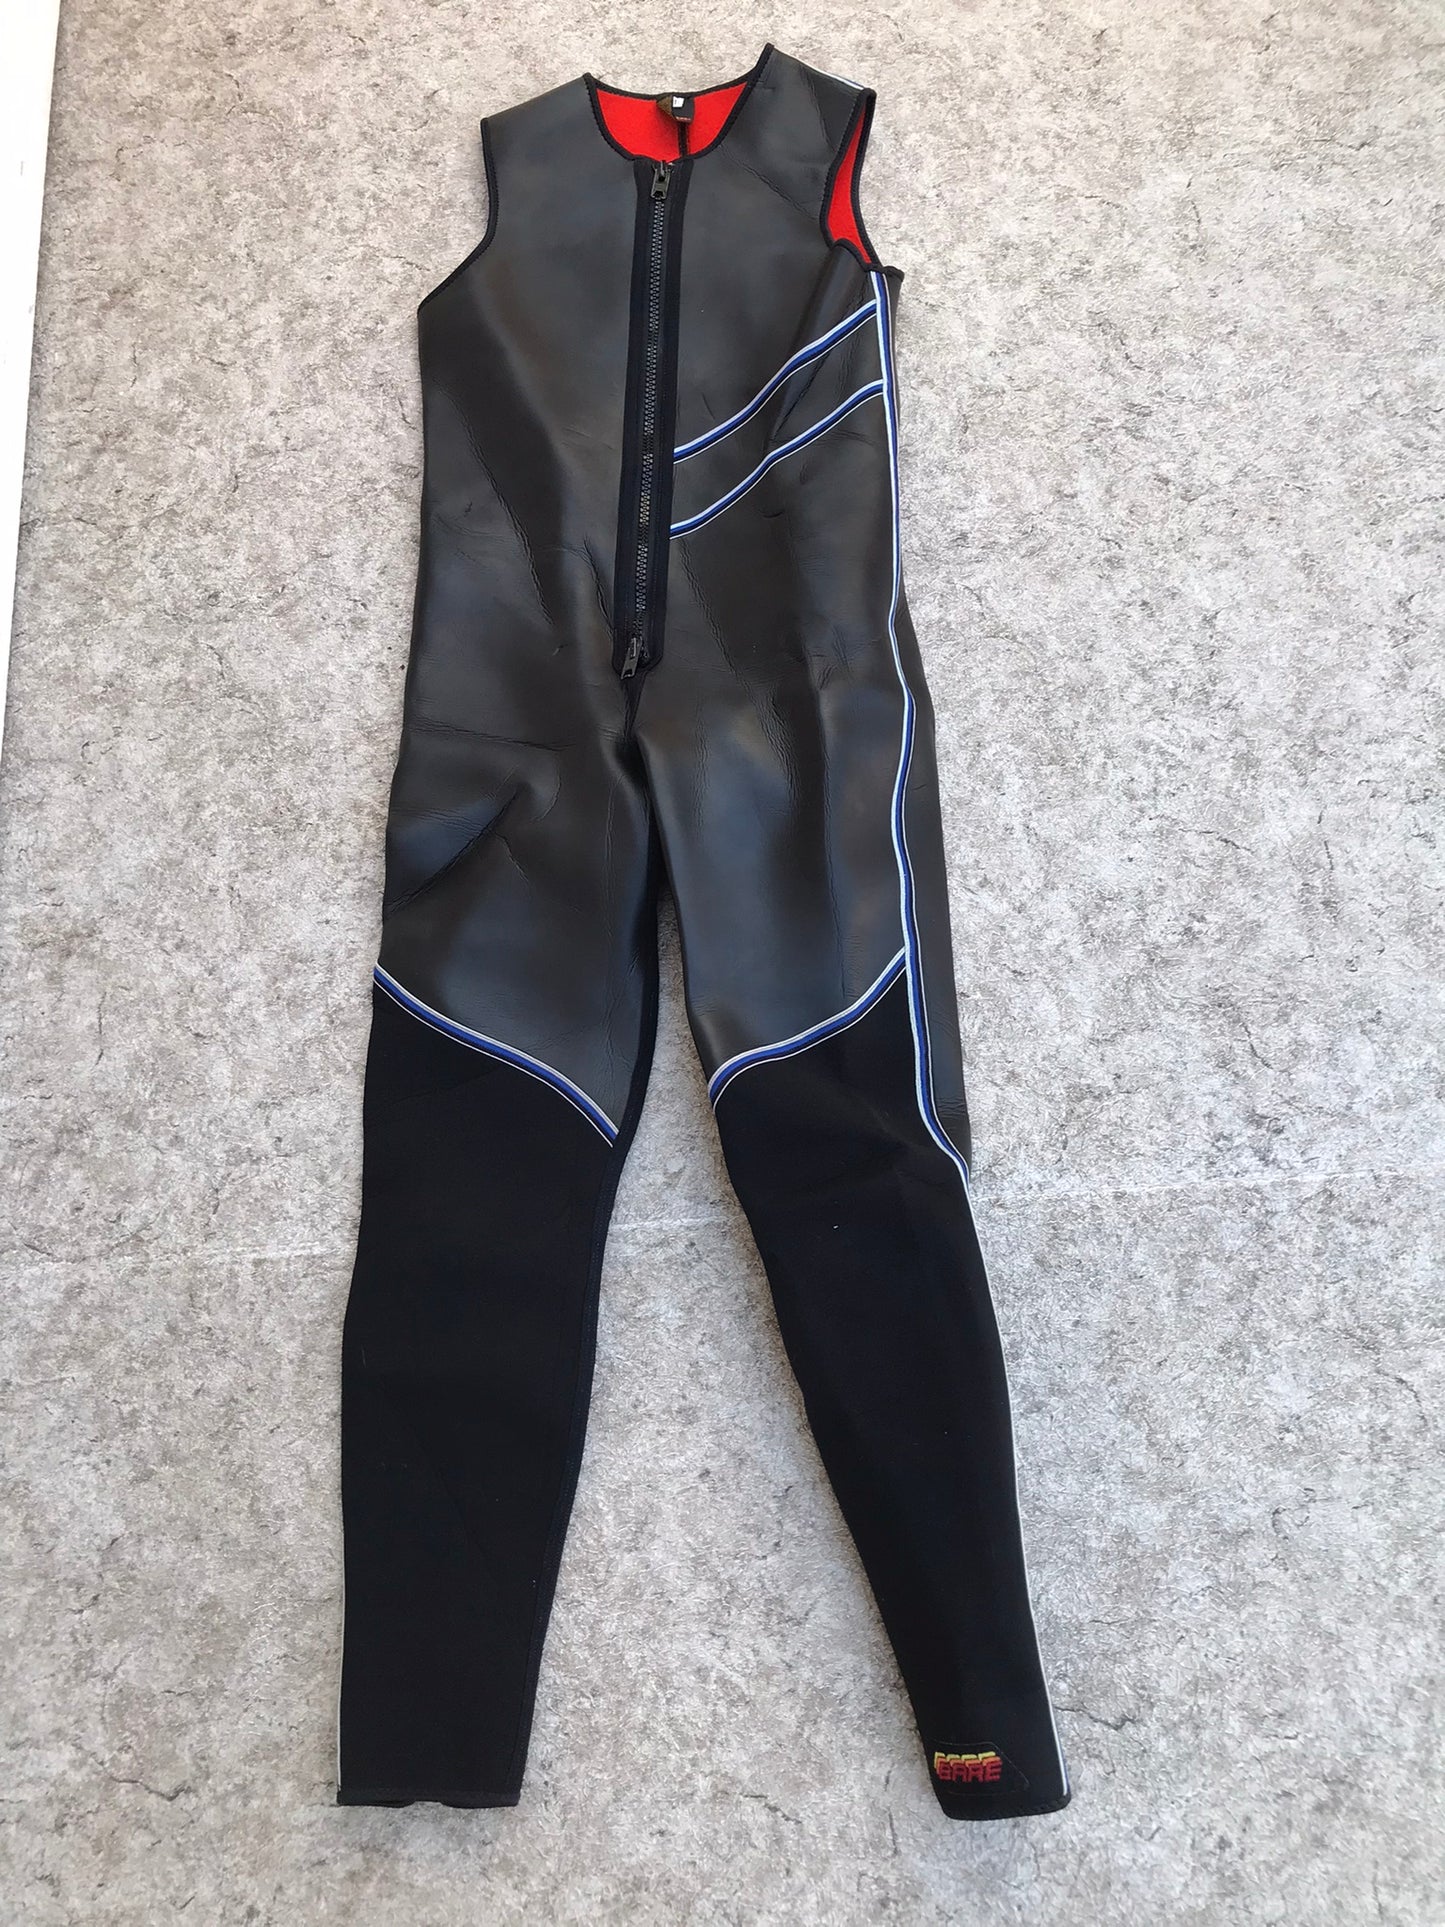 Wetsuit Men's Size M-L Full John 2pc With Jacket 4-5 mm Rubber Neopreme Surf Water Ski Kayak Paddleboard Canoe Sail Excellent